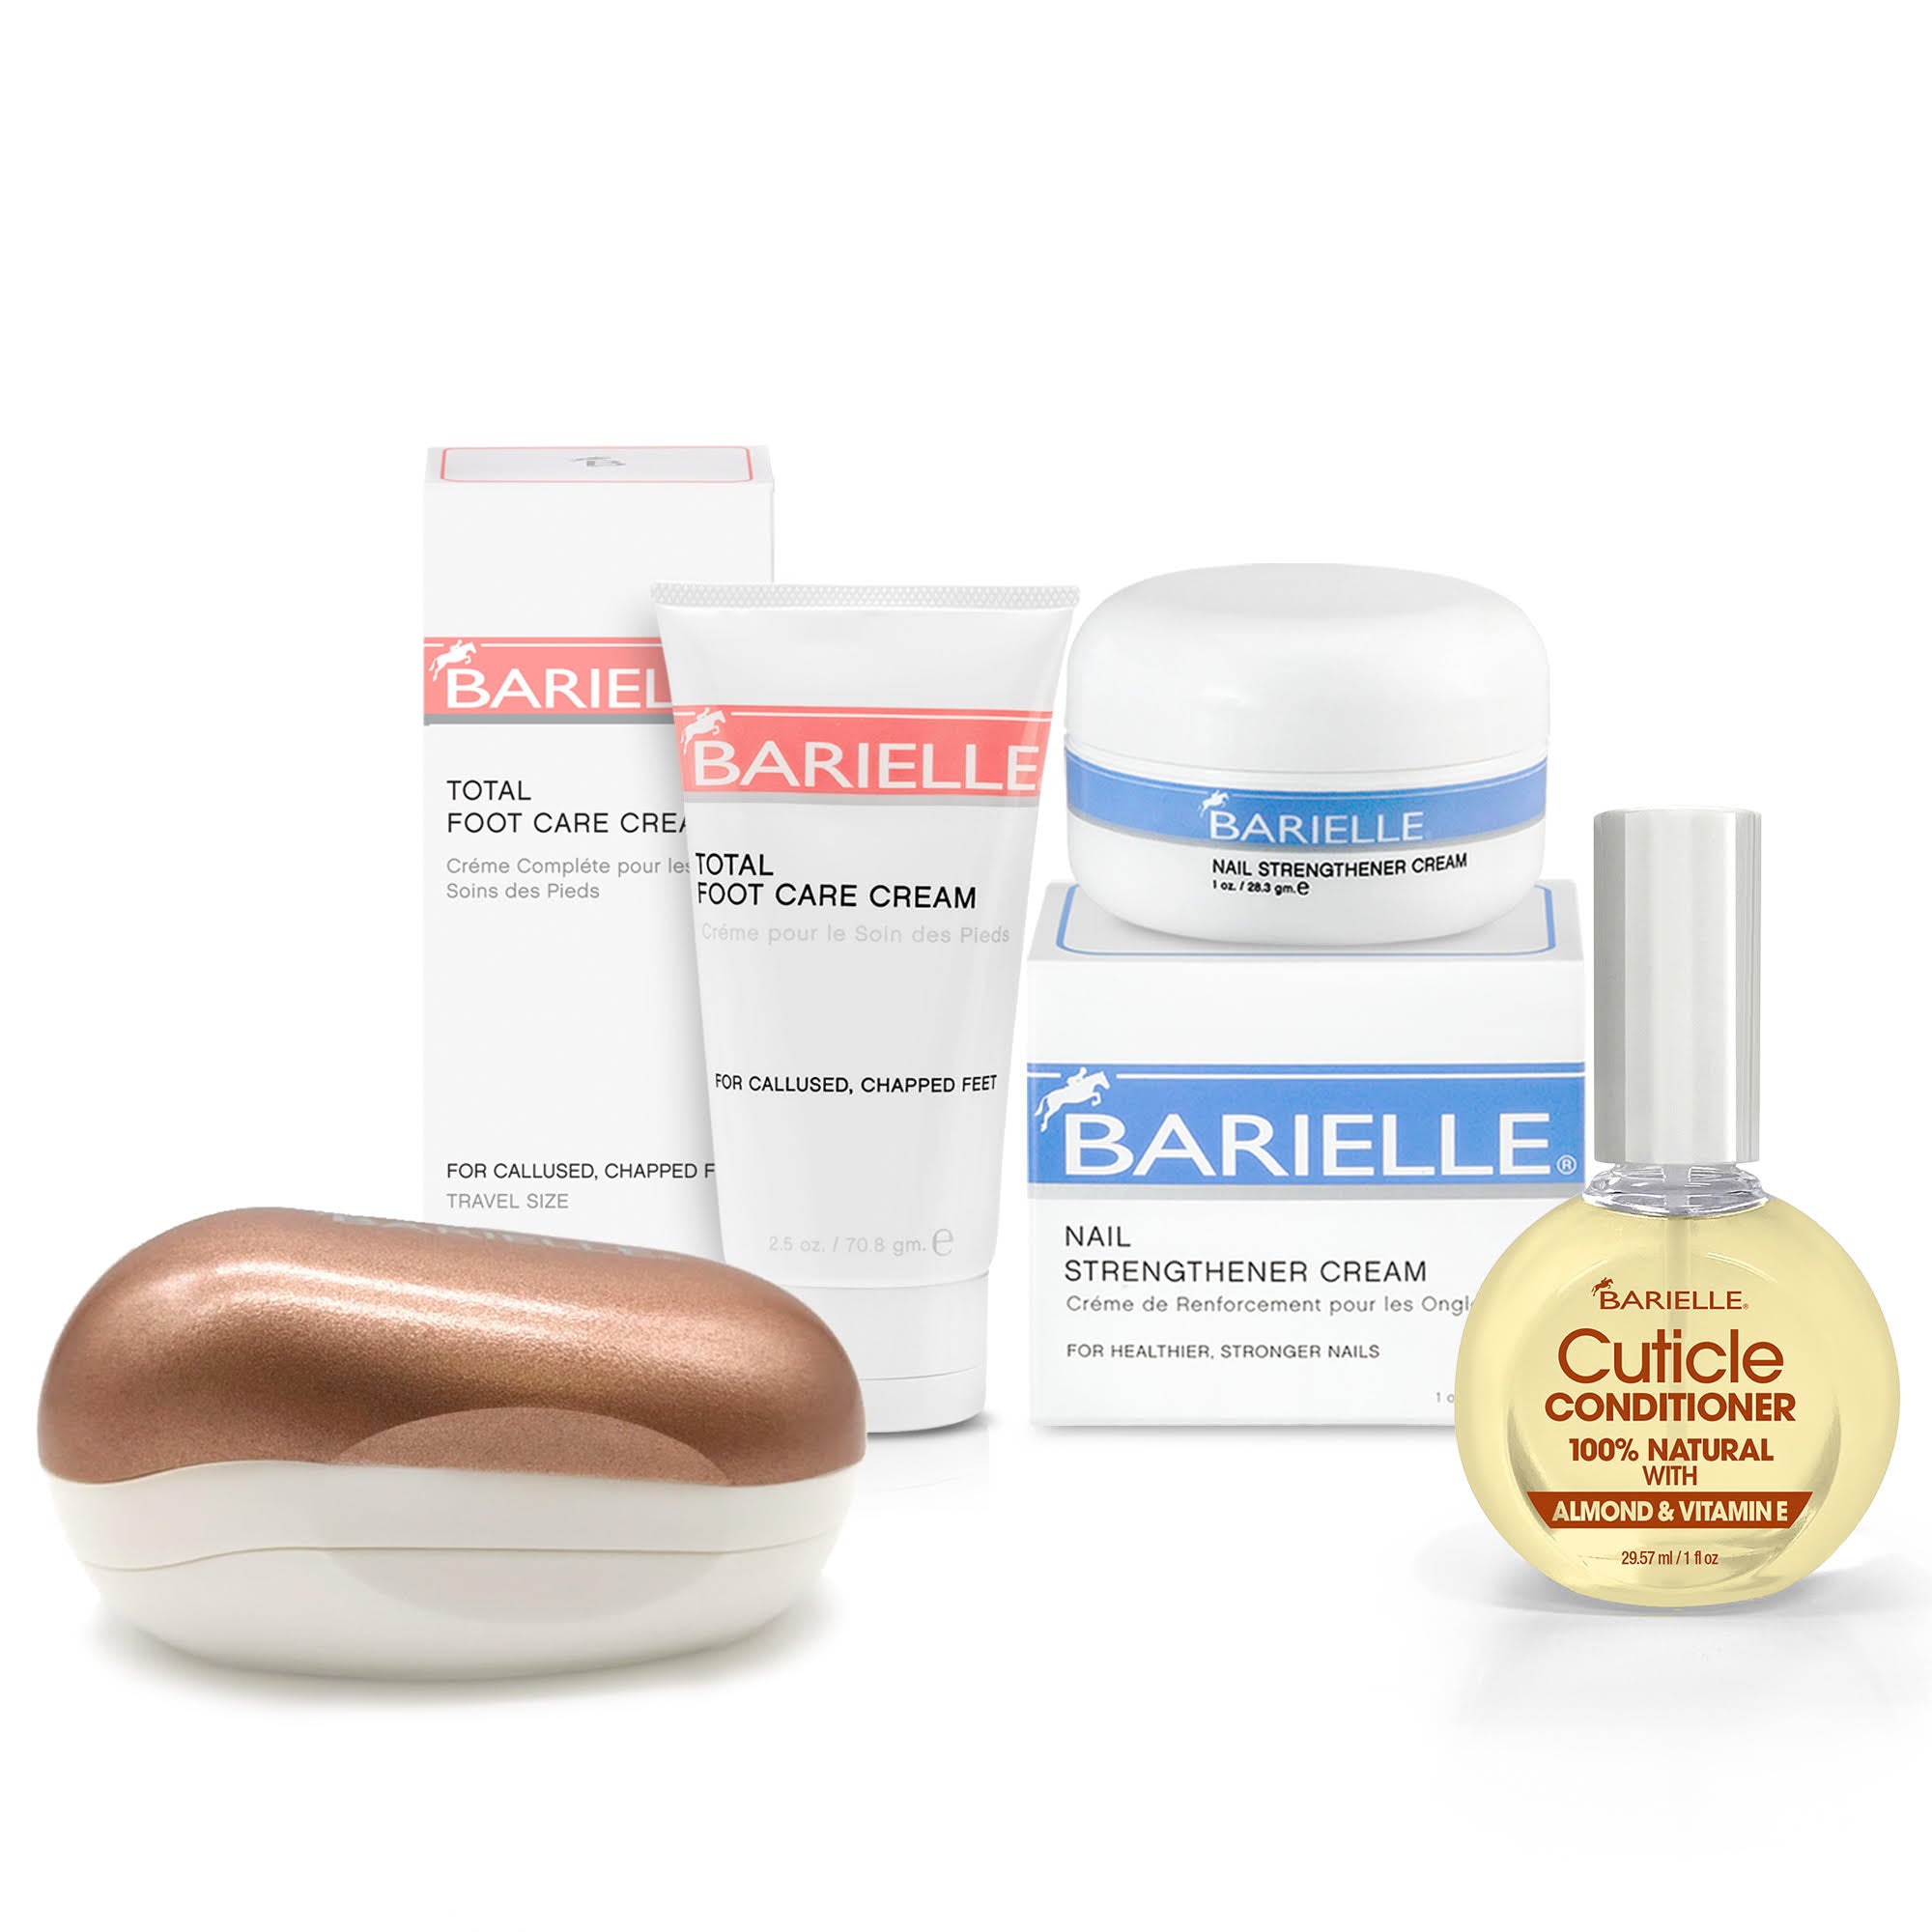 Barielle Portable Oval Gold & White Clamshell Foot File / Foot Rasp - with Stainless Steel Foot Files